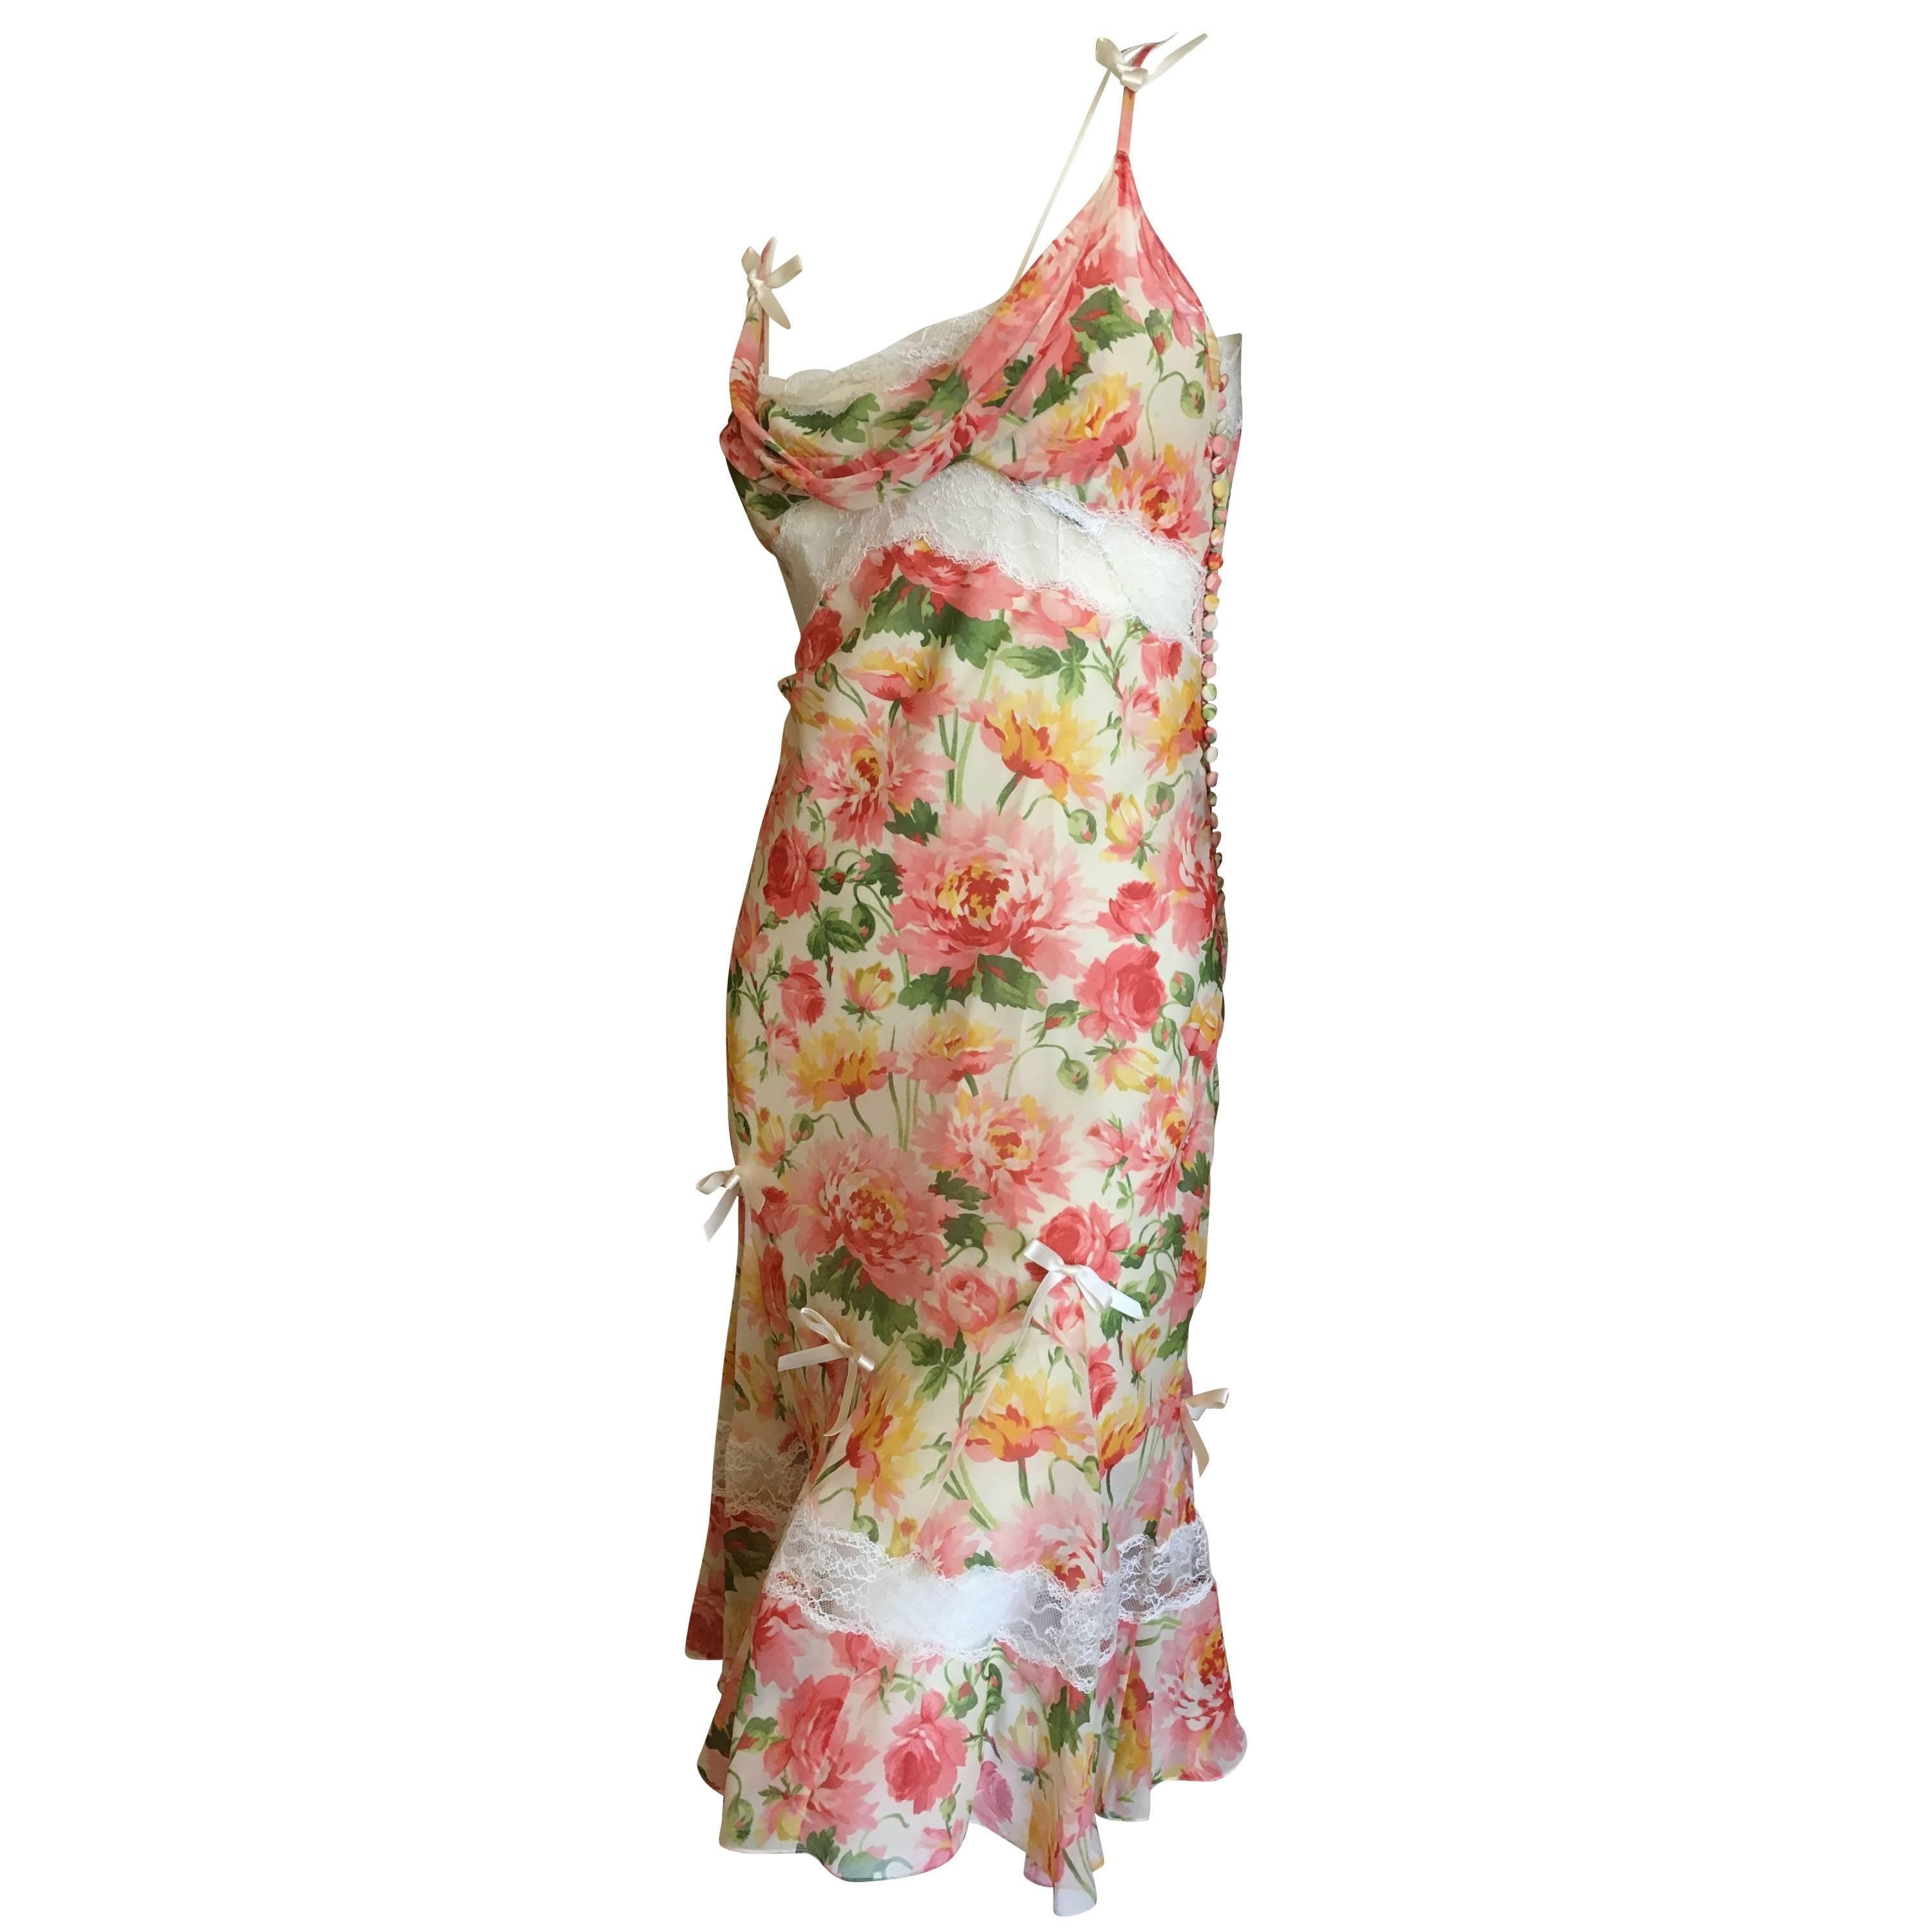 Christian Dior by John Galliano Romantic Floral Dress with Sheer Lace Inserts 38 For Sale